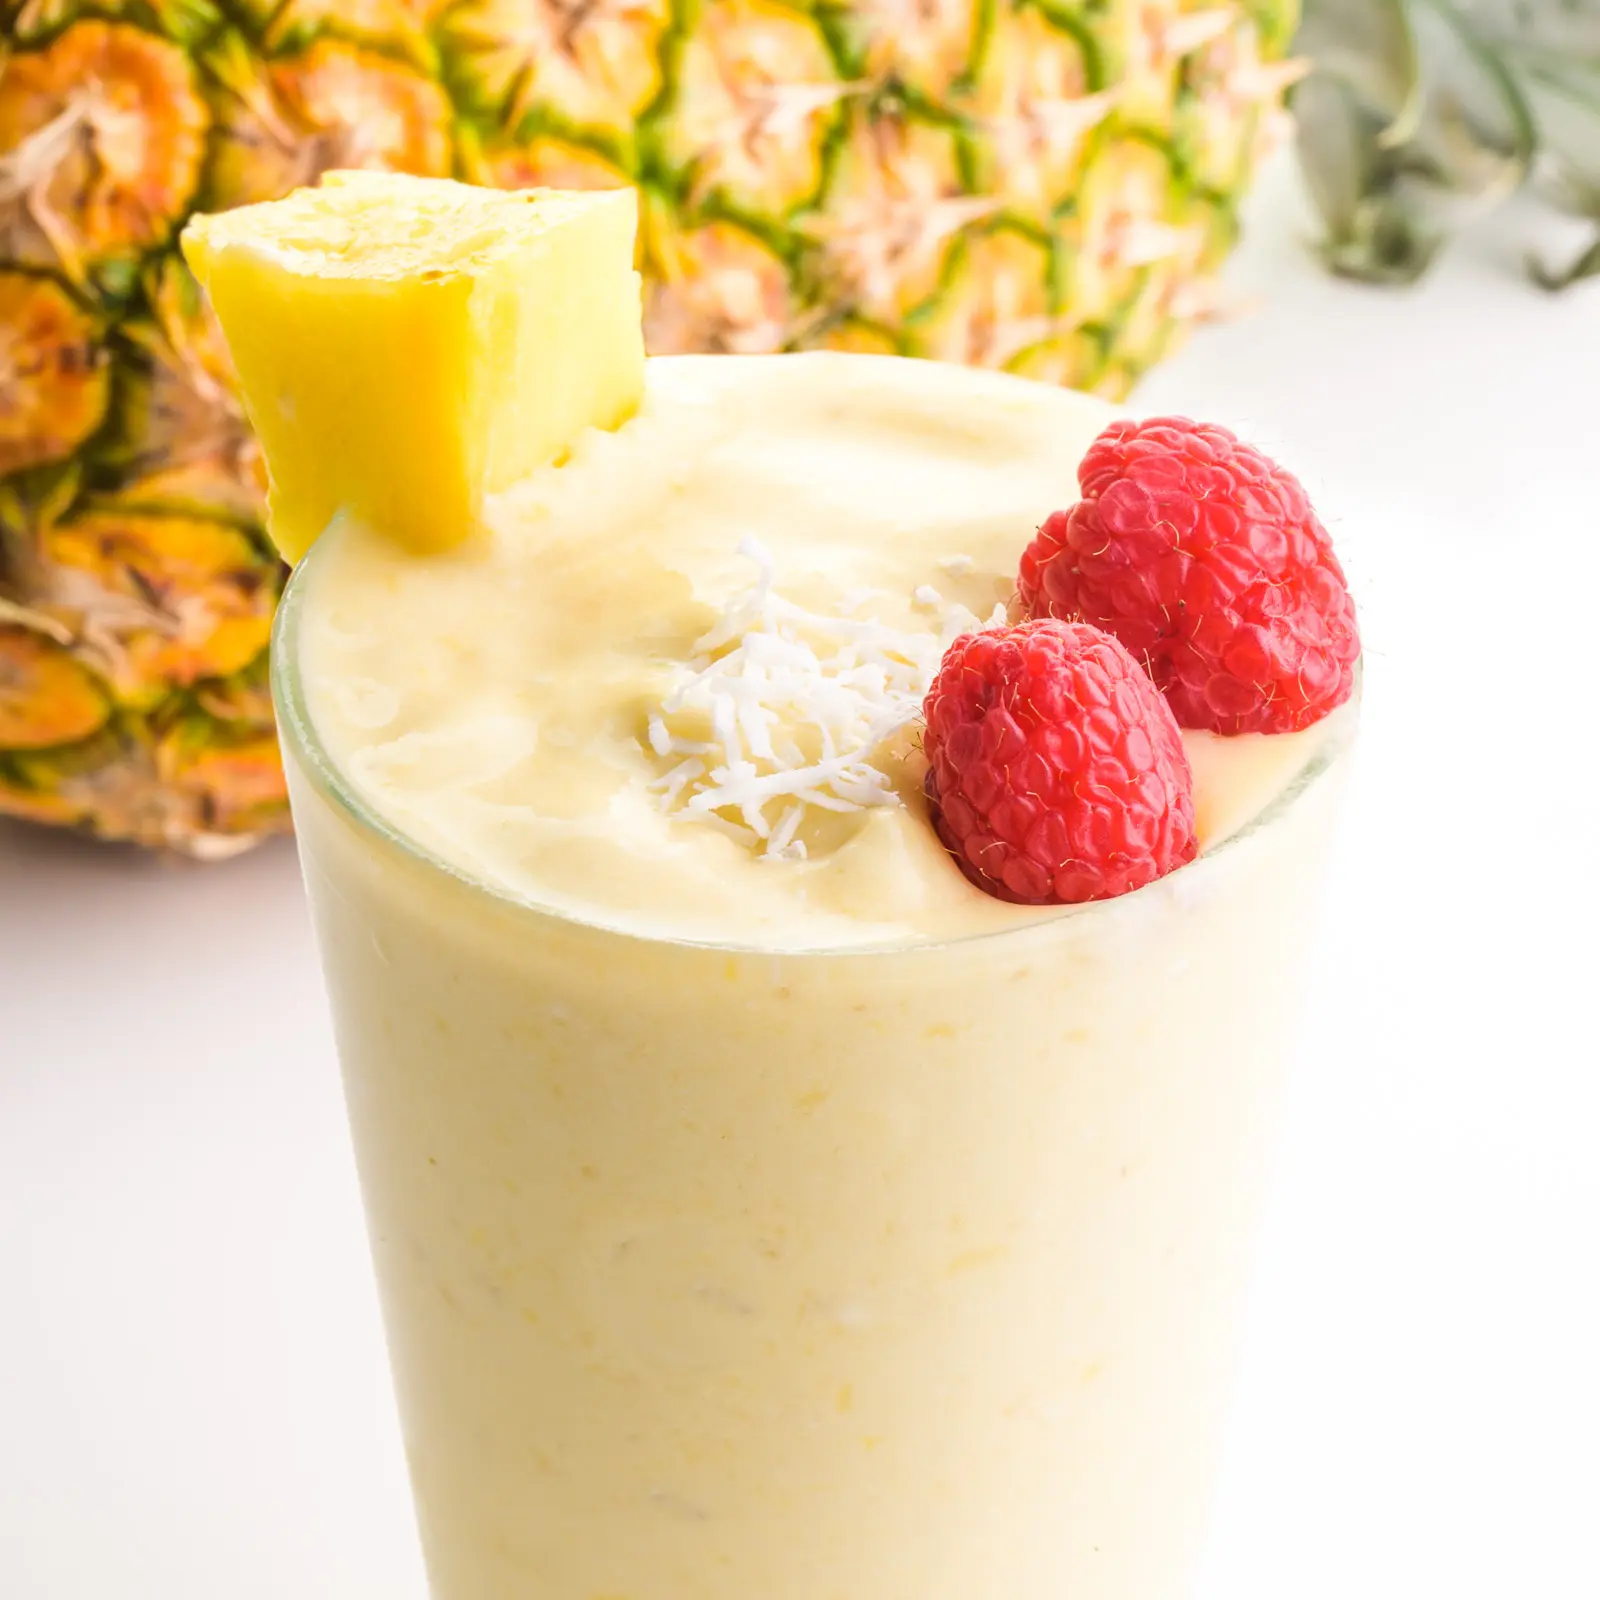 A glass of Pina colada smoothie has fresh raspberries, coconut flakes, and other fresh fruit.